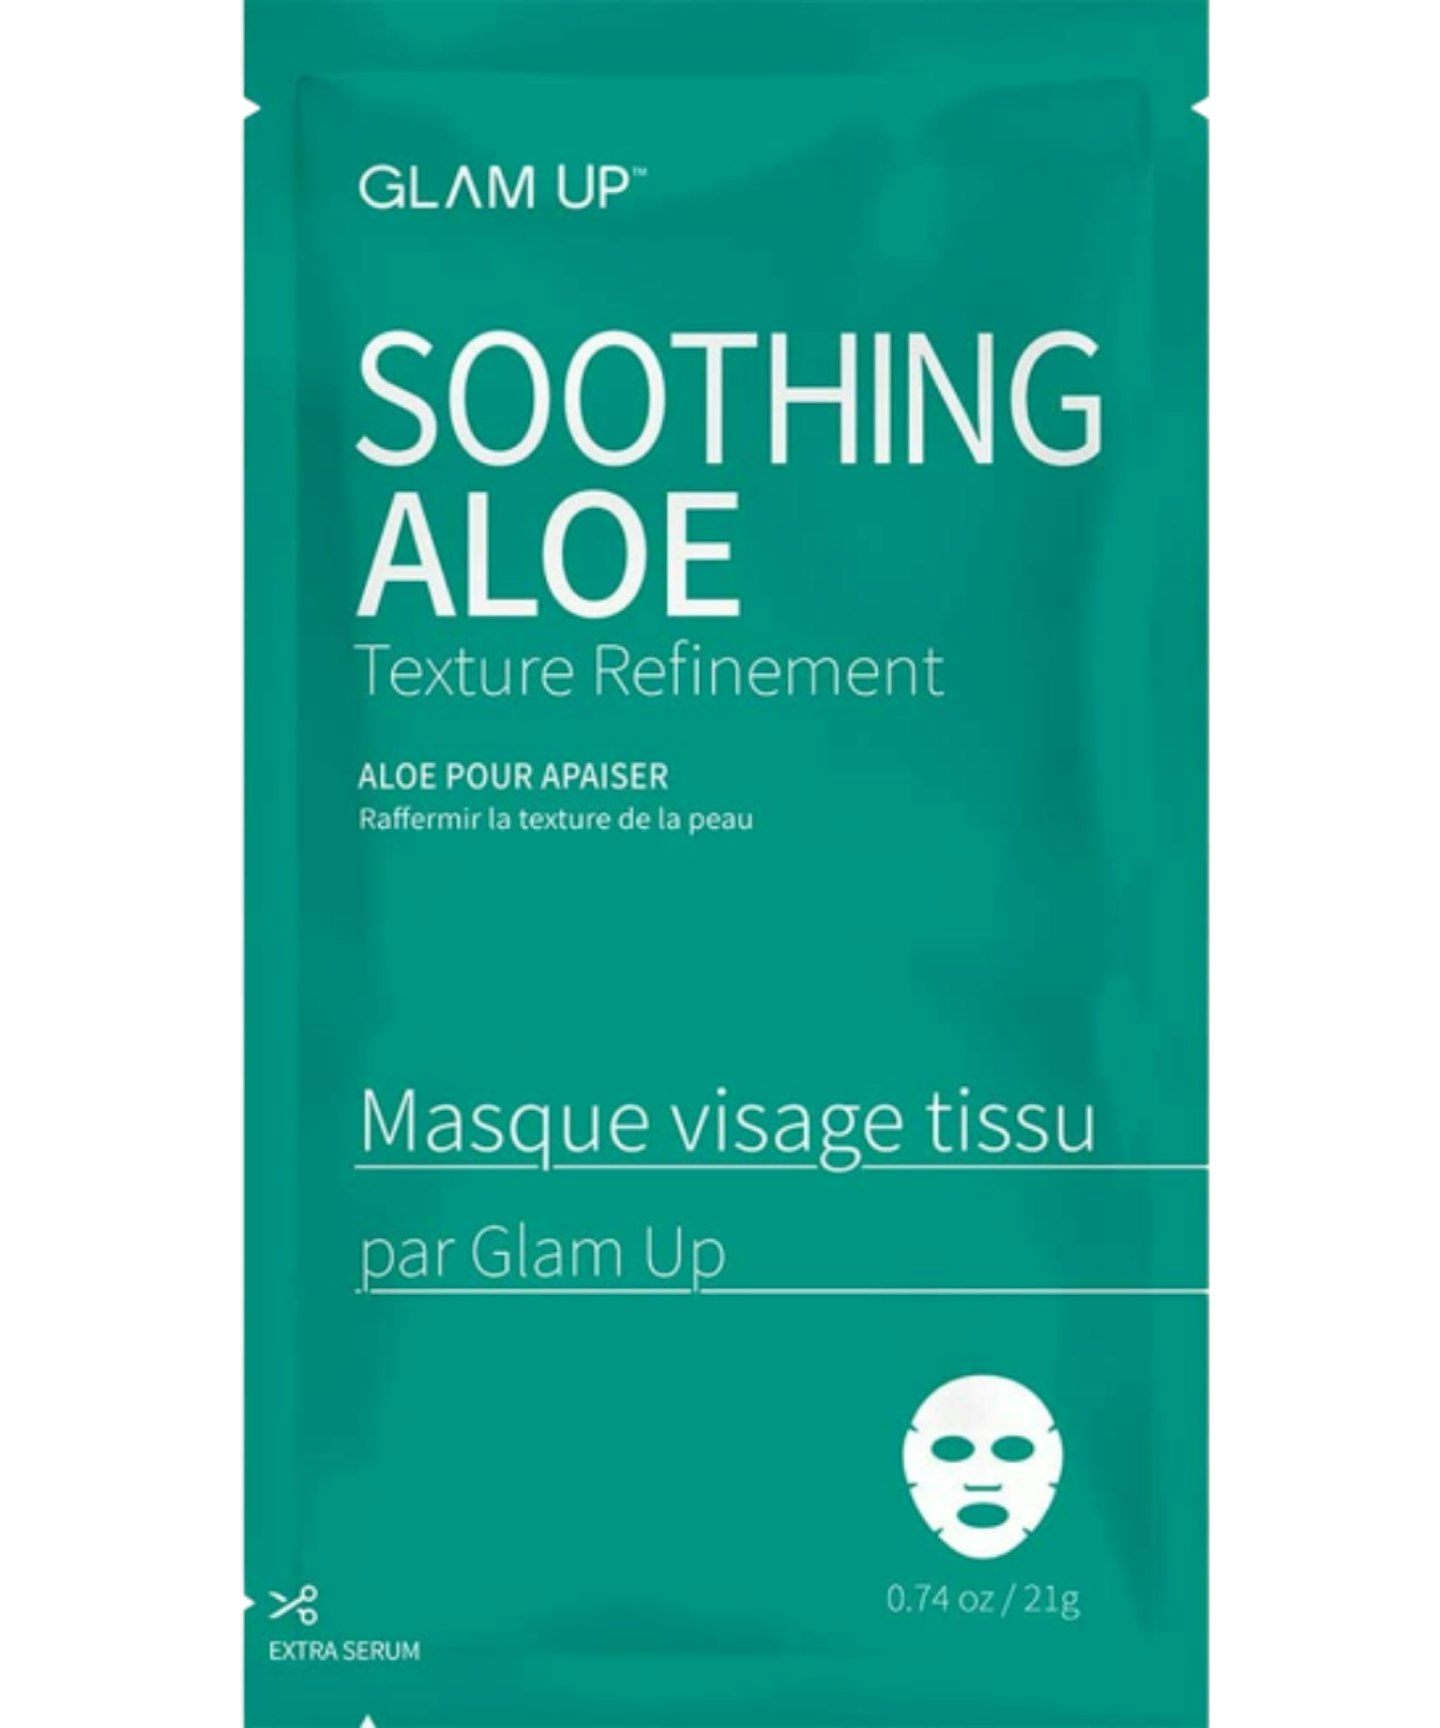 A picture of the Soothing Aloe Sheet Mask from Glam Up.